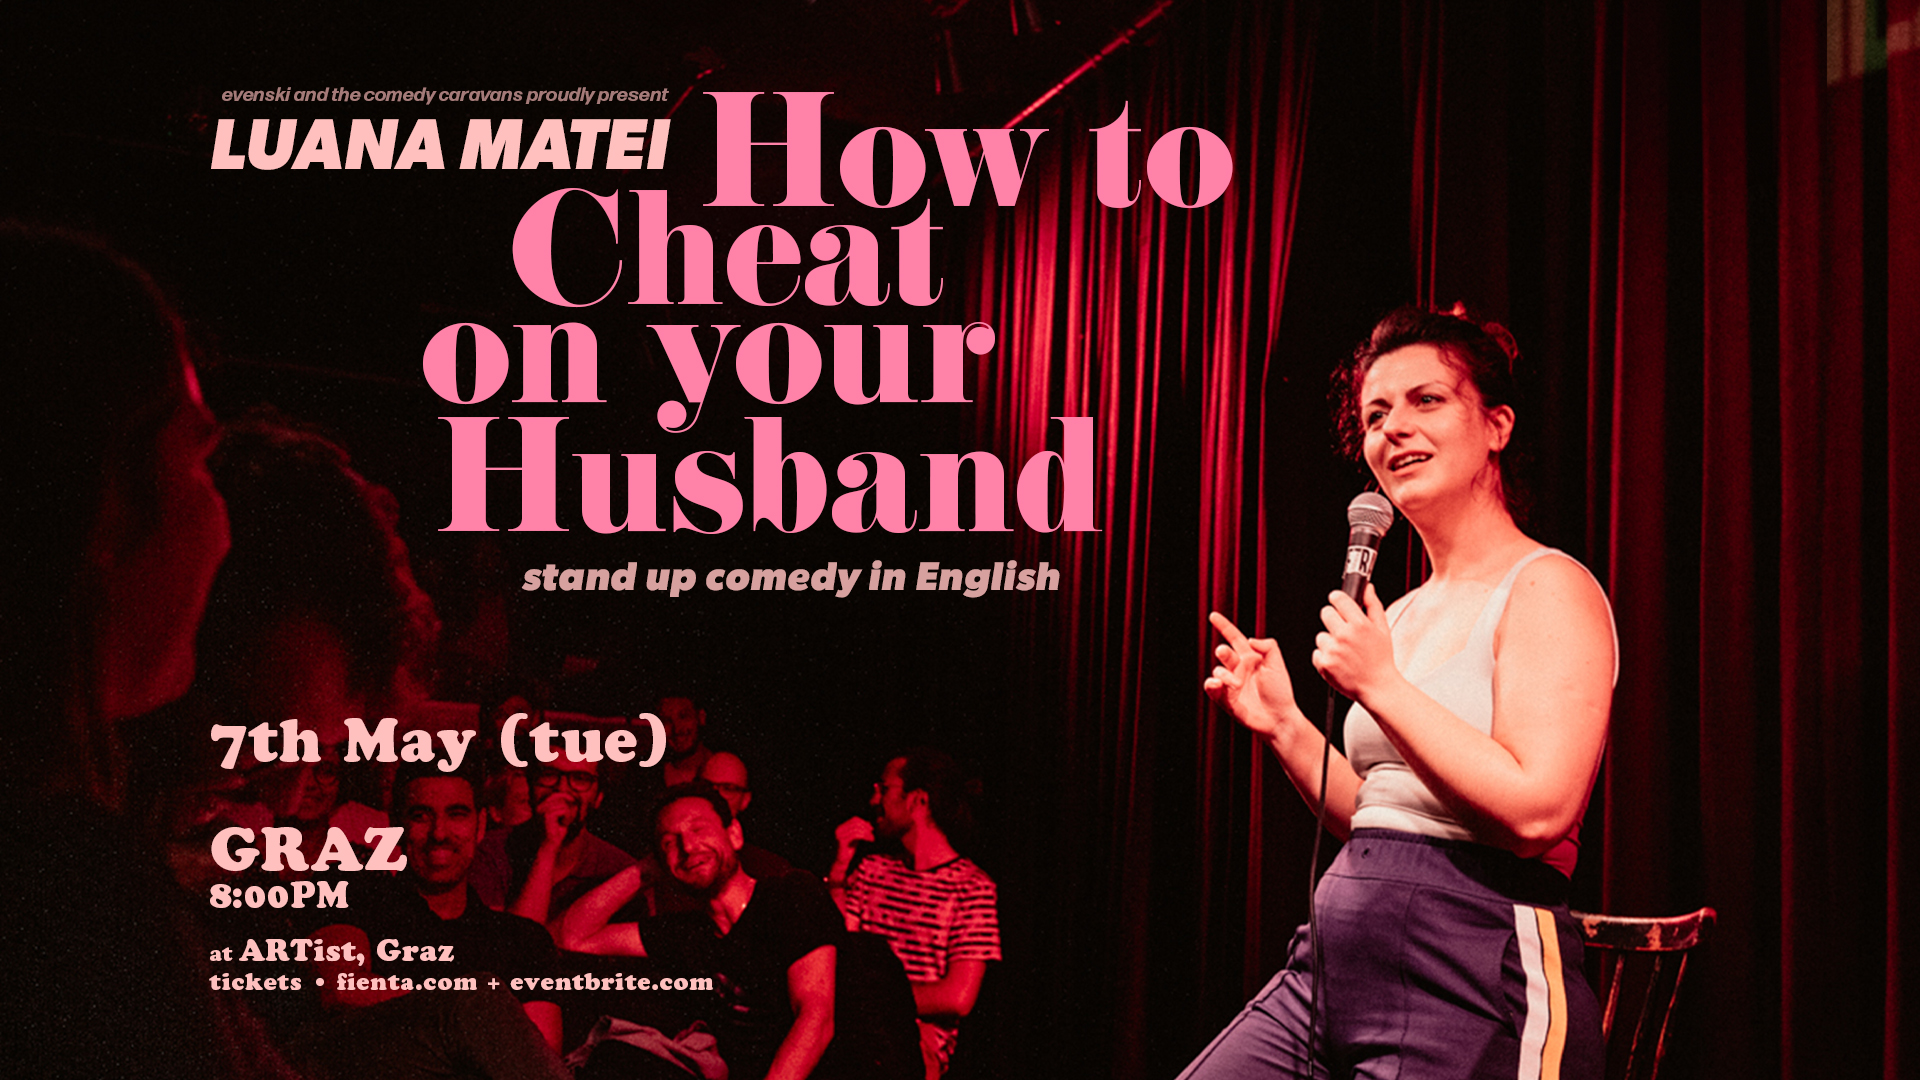 LUANA MATEI - How to Cheat on Your Husband